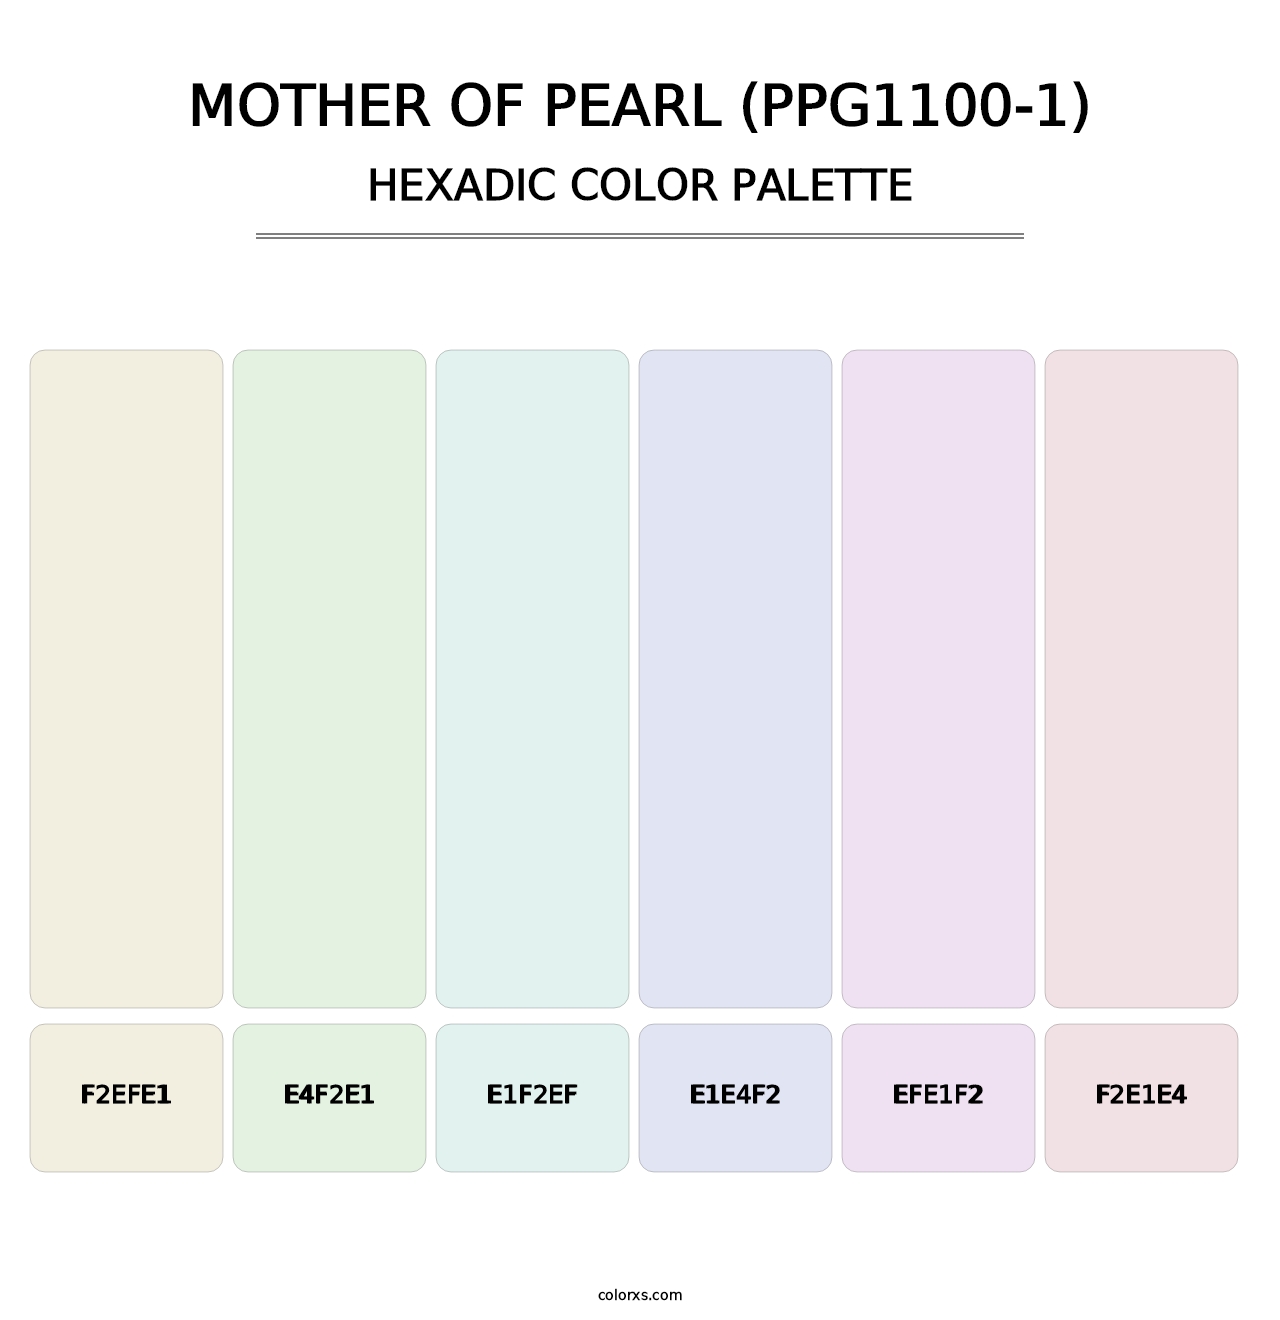 Mother Of Pearl (PPG1100-1) - Hexadic Color Palette